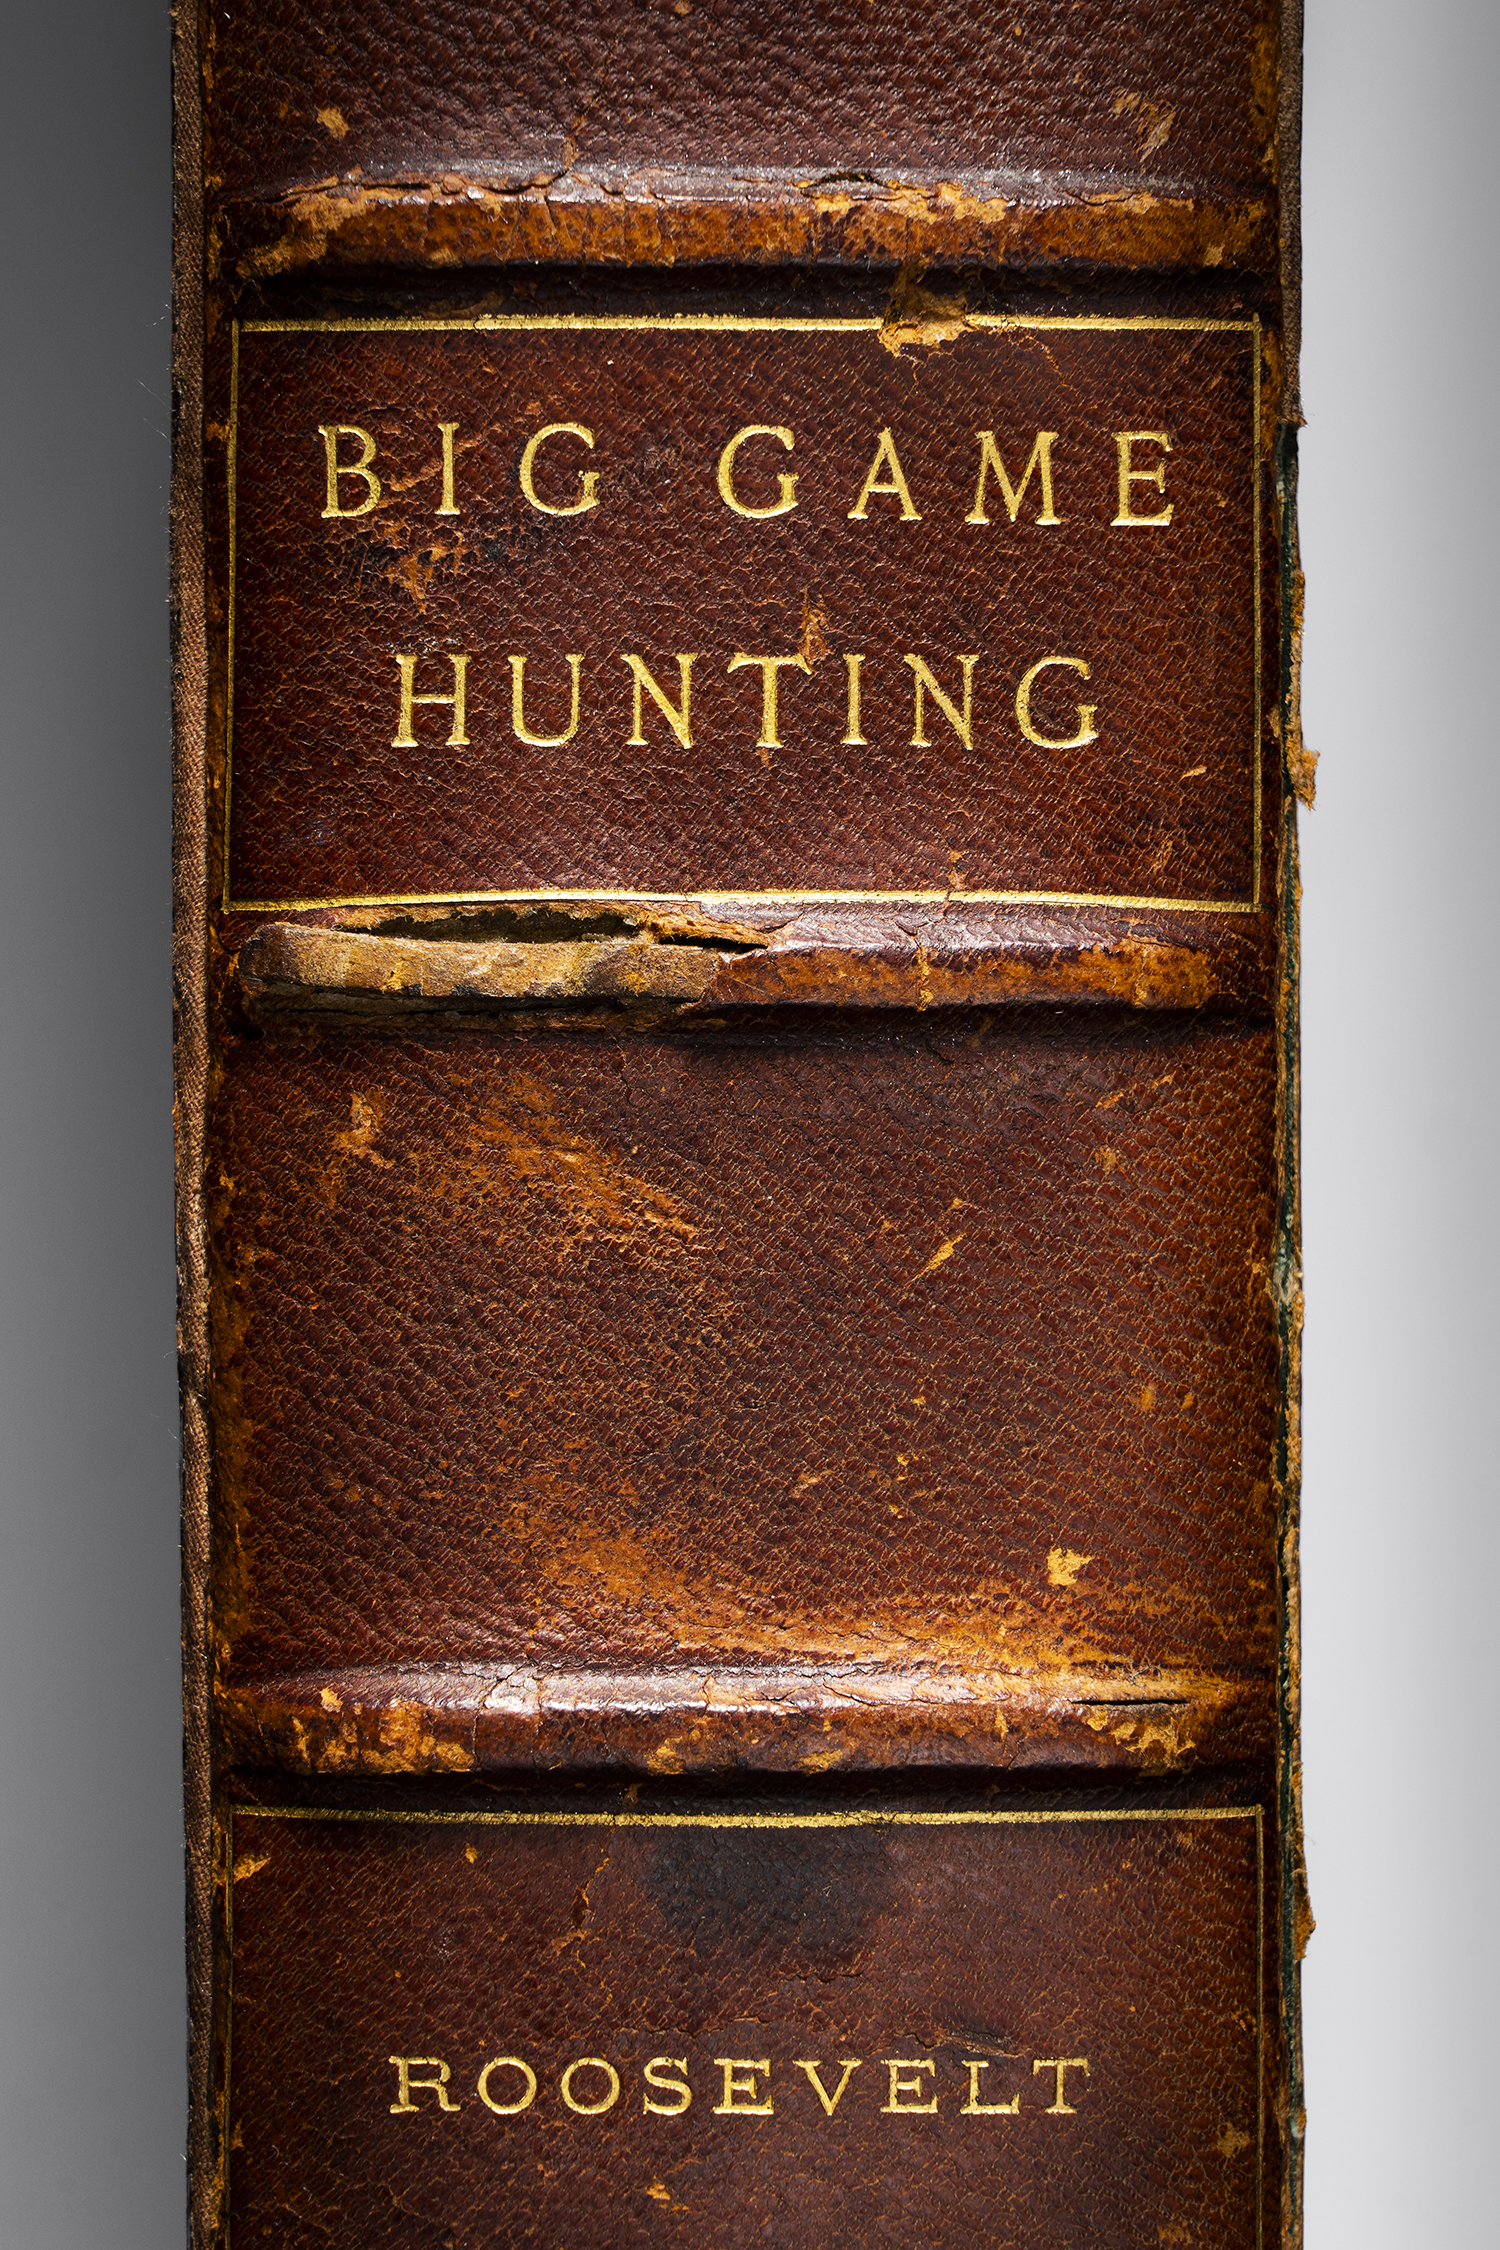 A book on big-game hunting by Theodore Roosevelt.